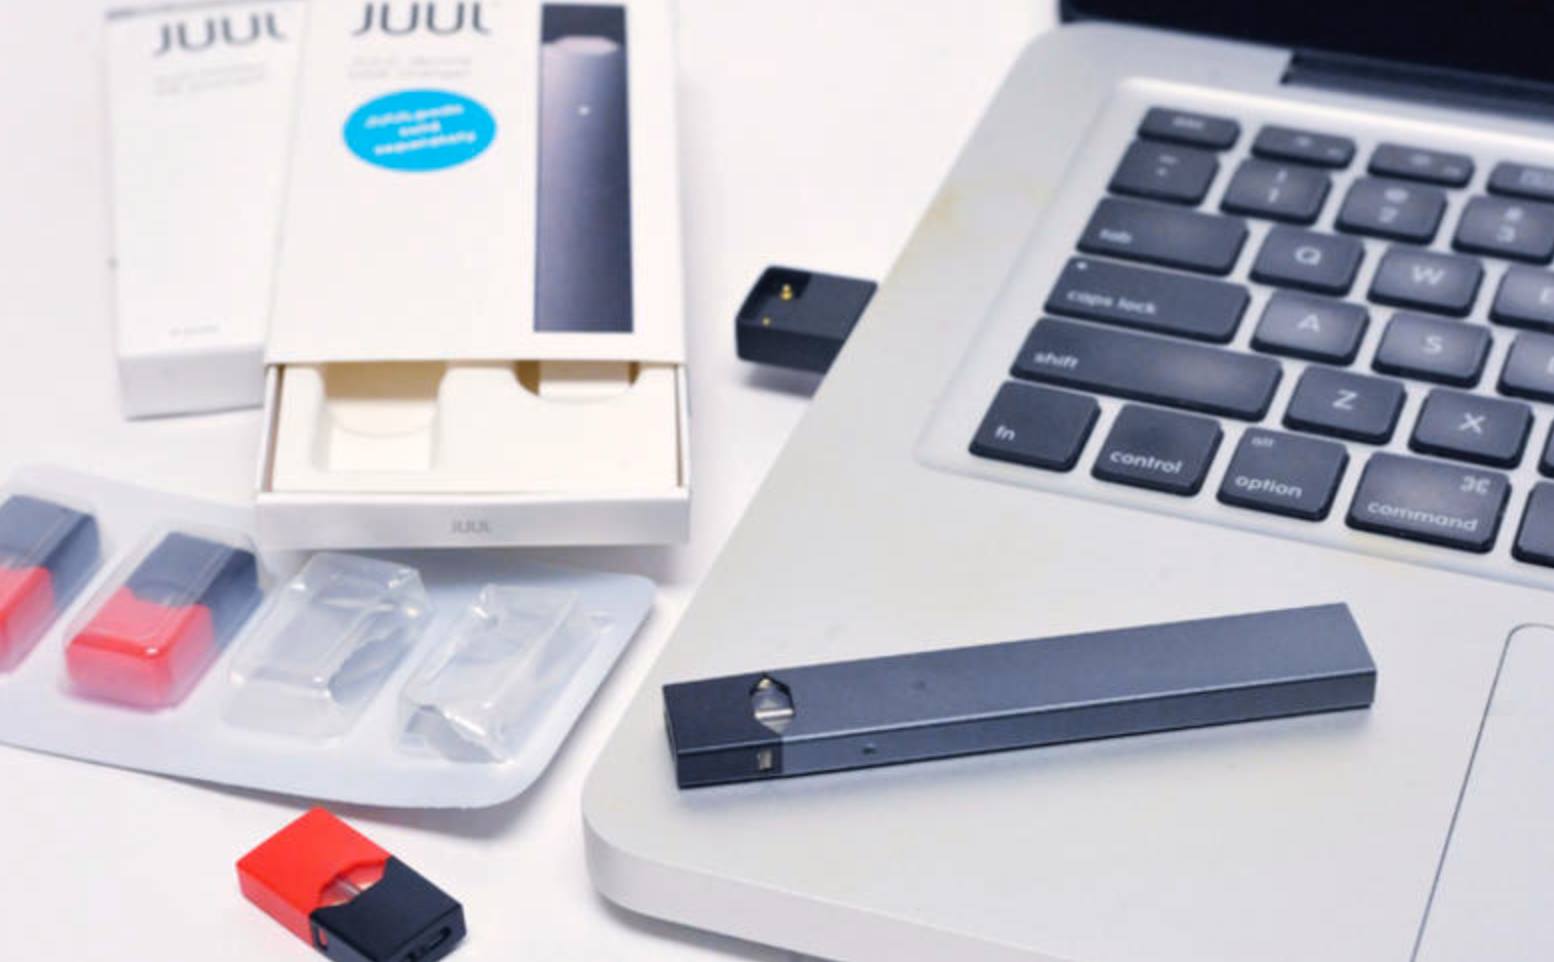 Juul to exit international markets, layoff additional employees